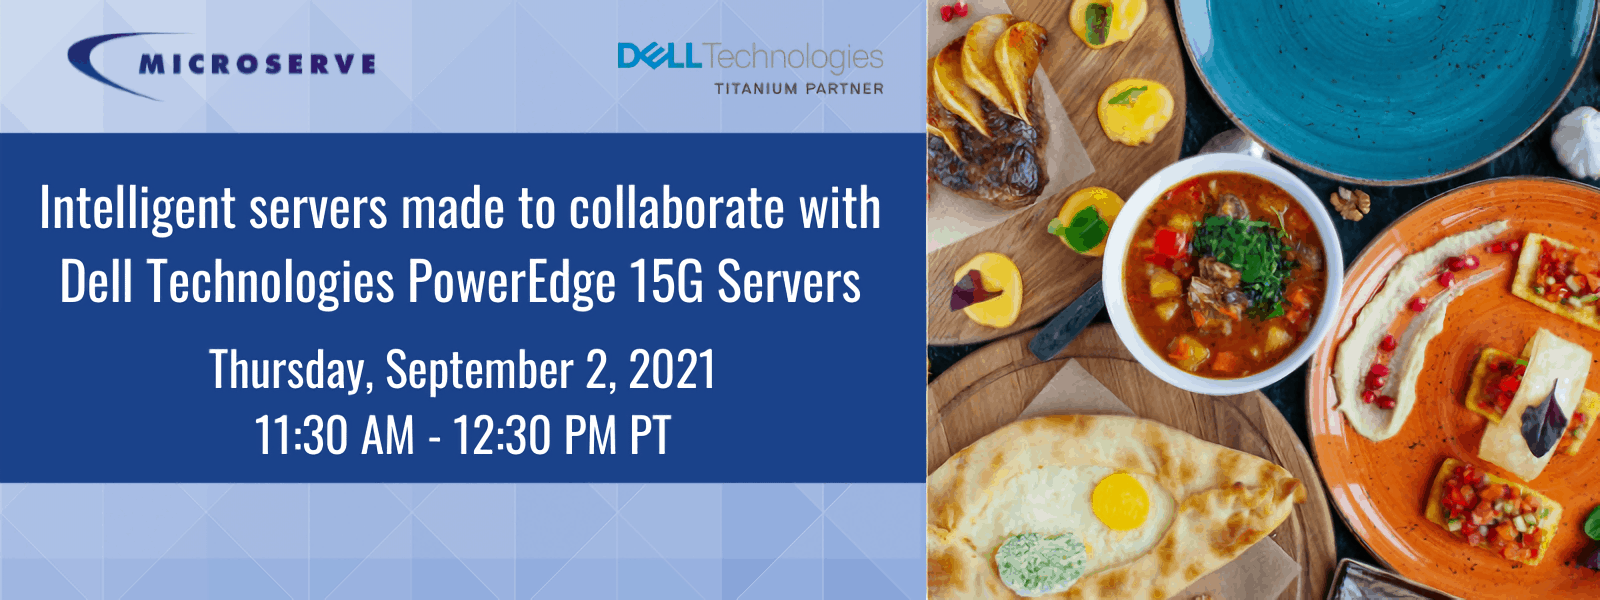 Sept 2 - Dell Lunch and Learn